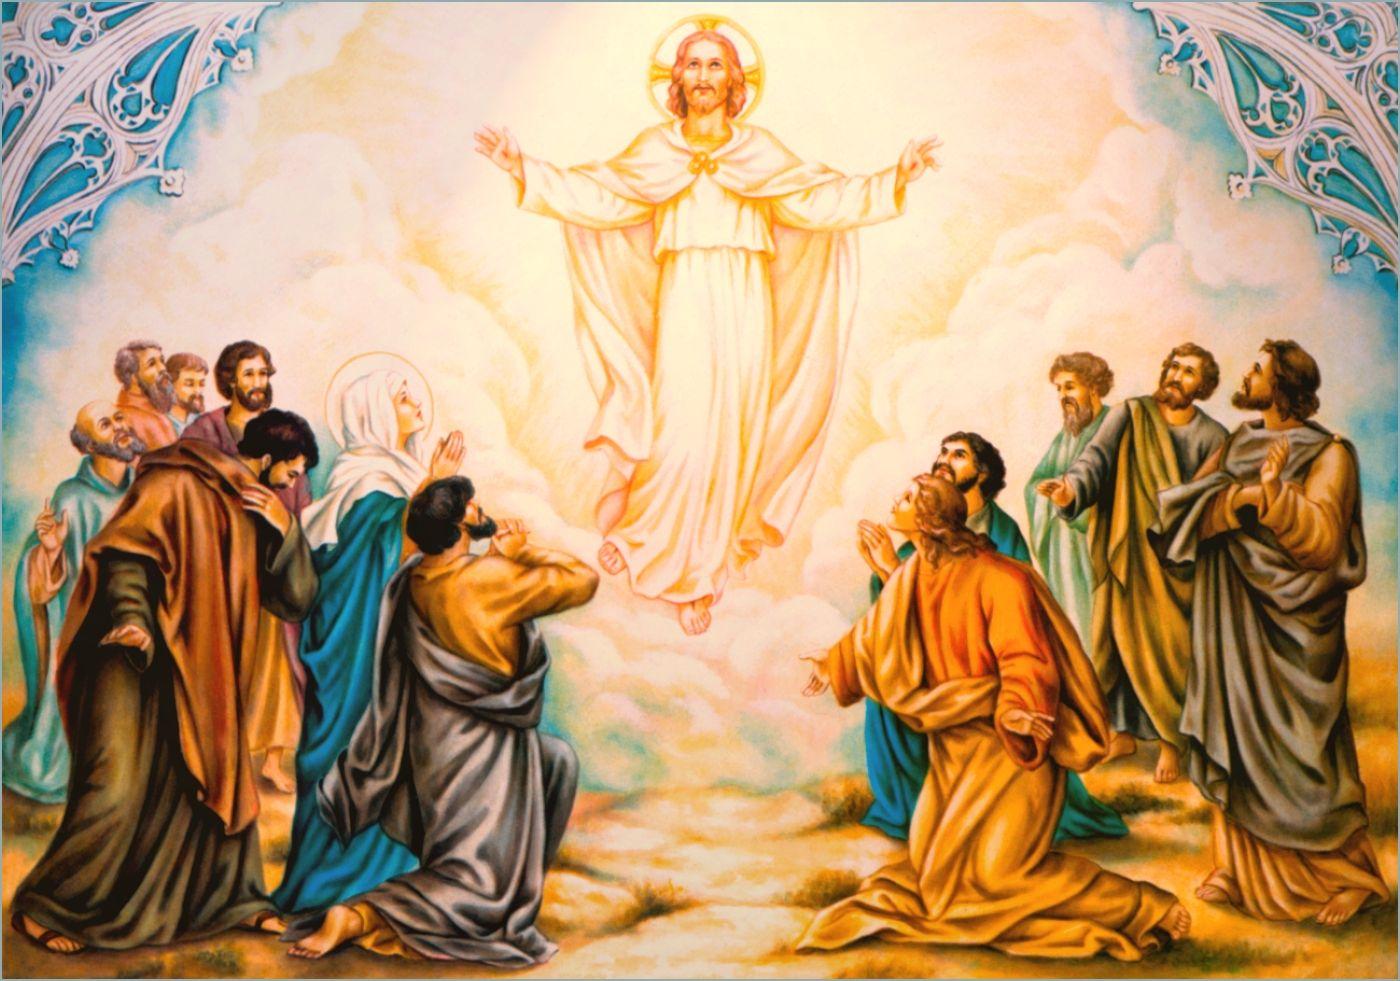 WHEN DID CHRIST ASCEND INTO HEAVEN? Christ ascended, body and soul